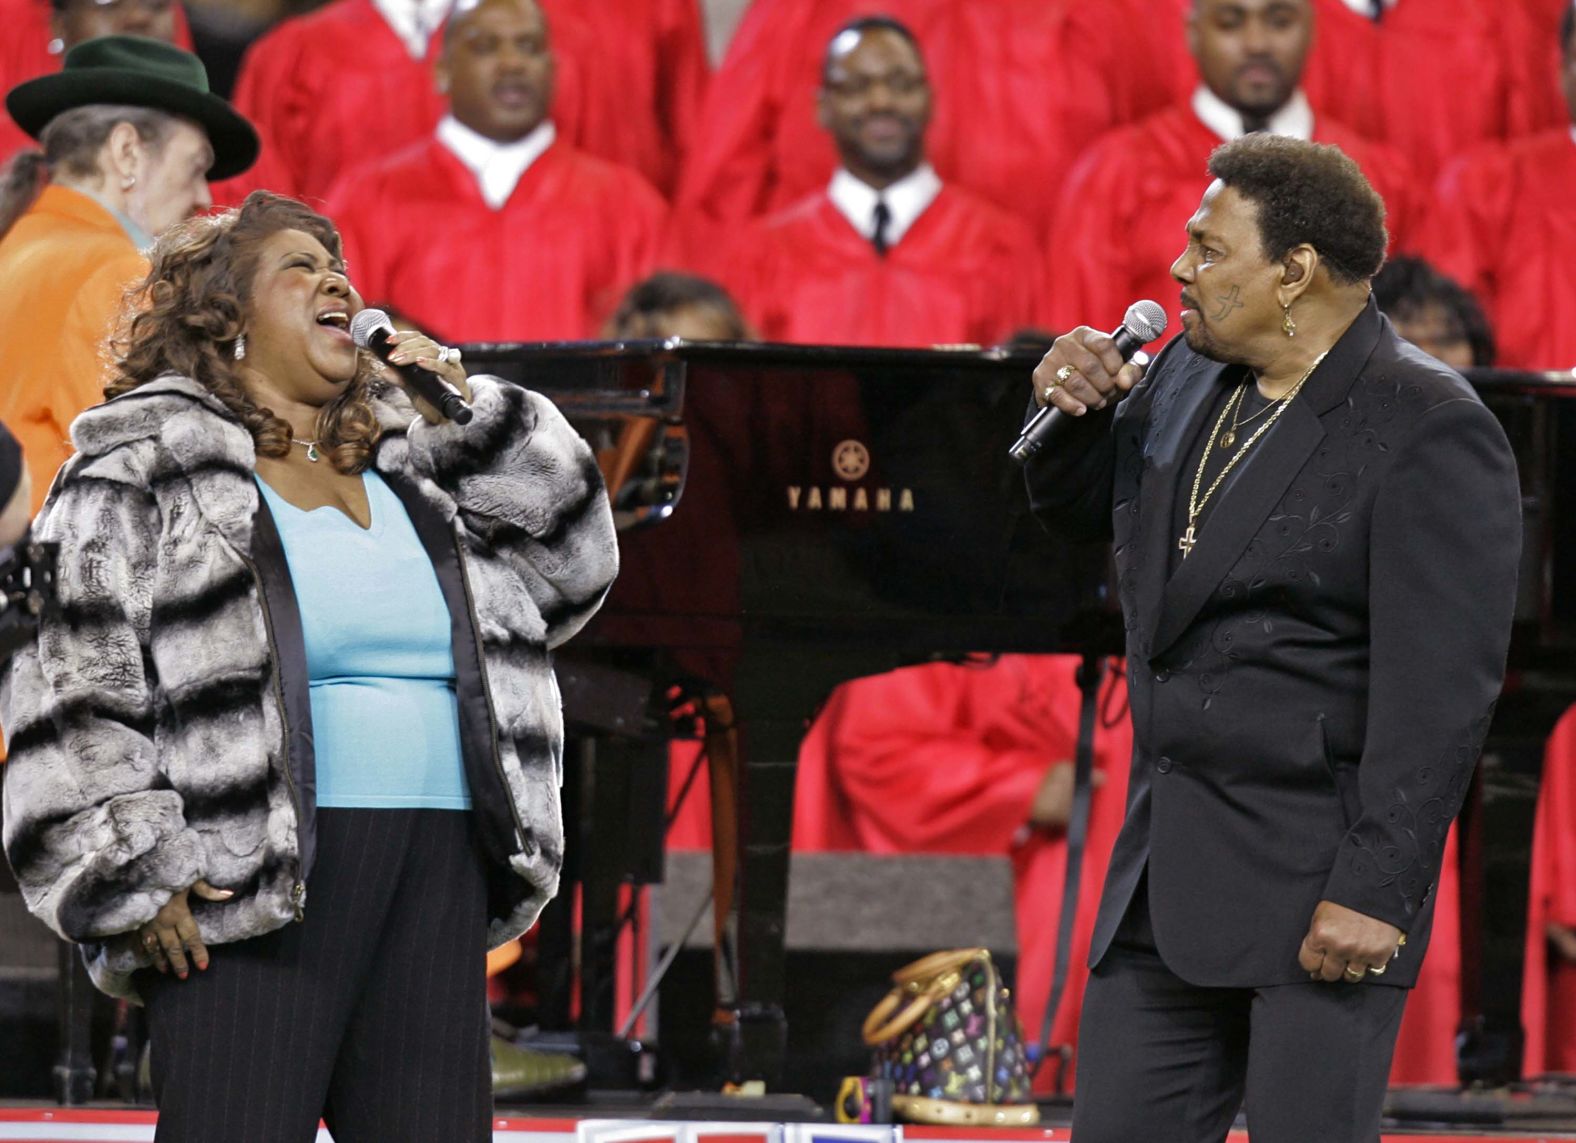 Franklin and Aaron Neville performed the national anthem before the 2006 Super Bowl in Detroit. 